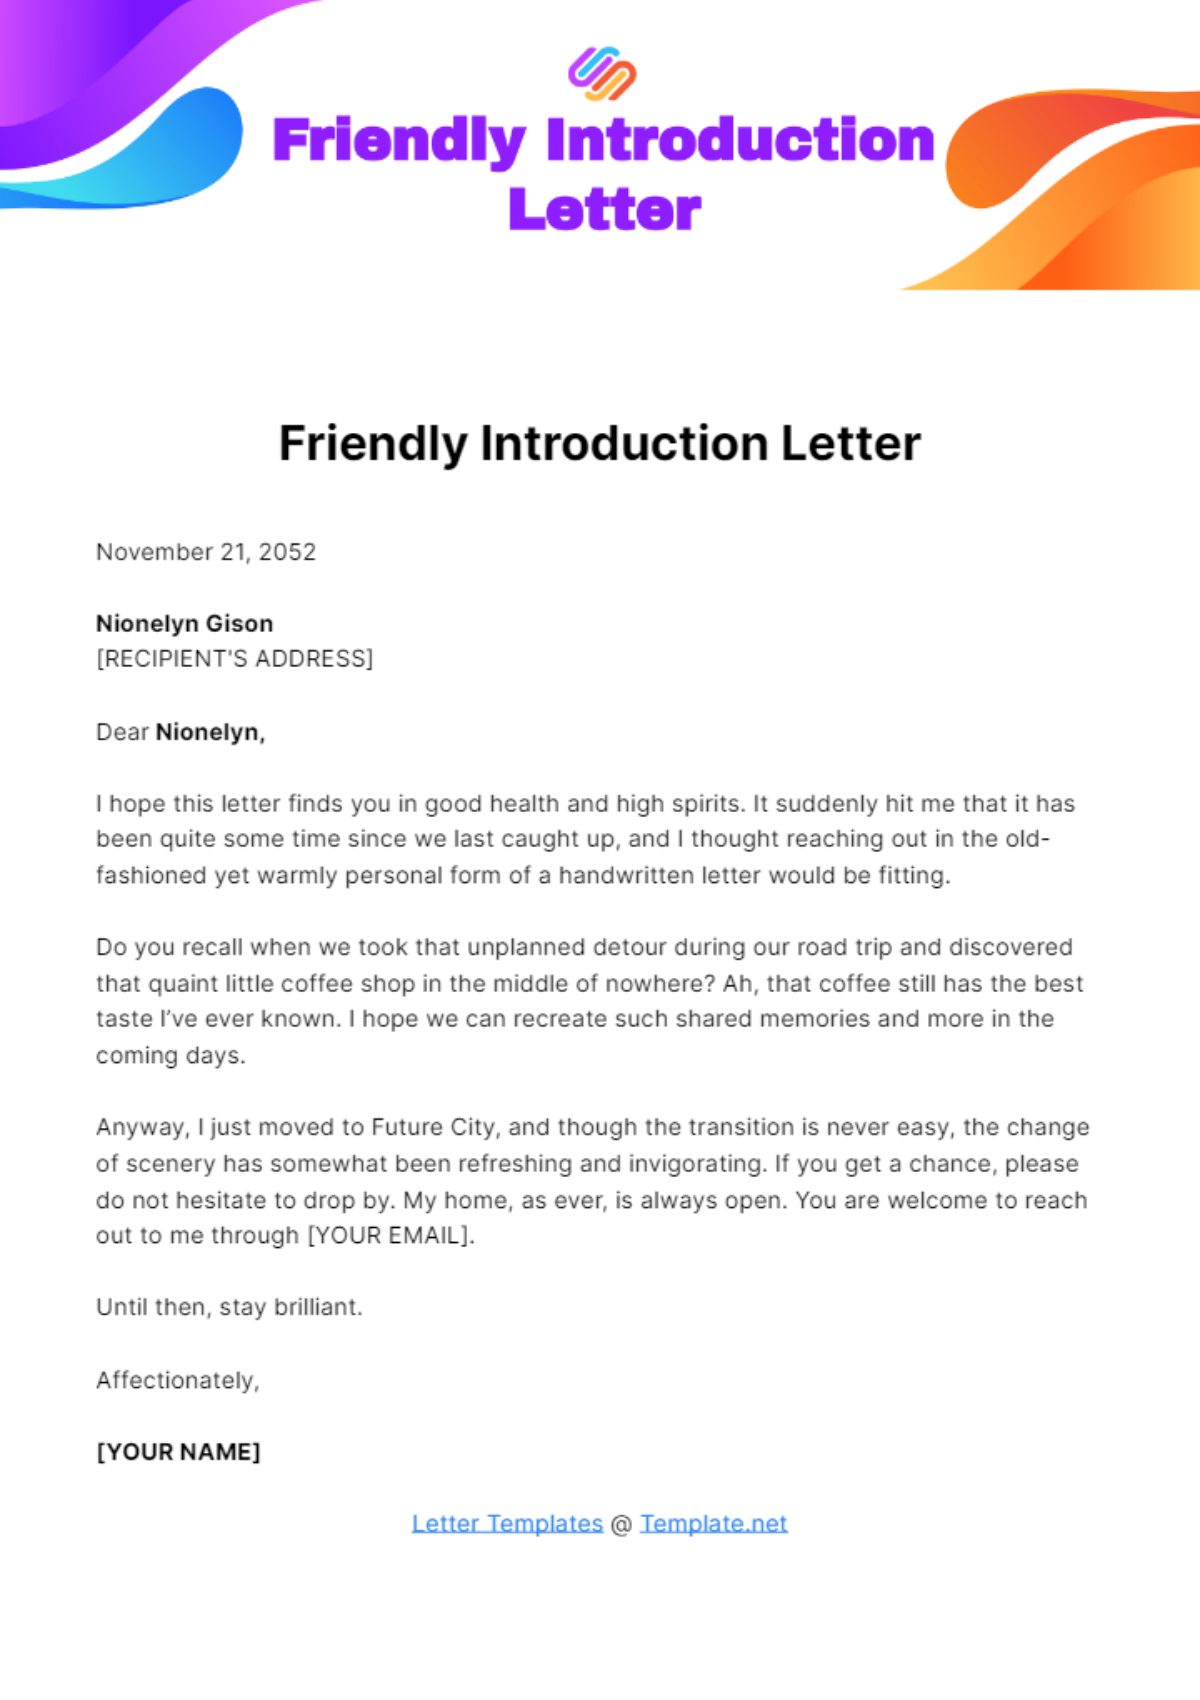 Friendly Introduction Letter Template